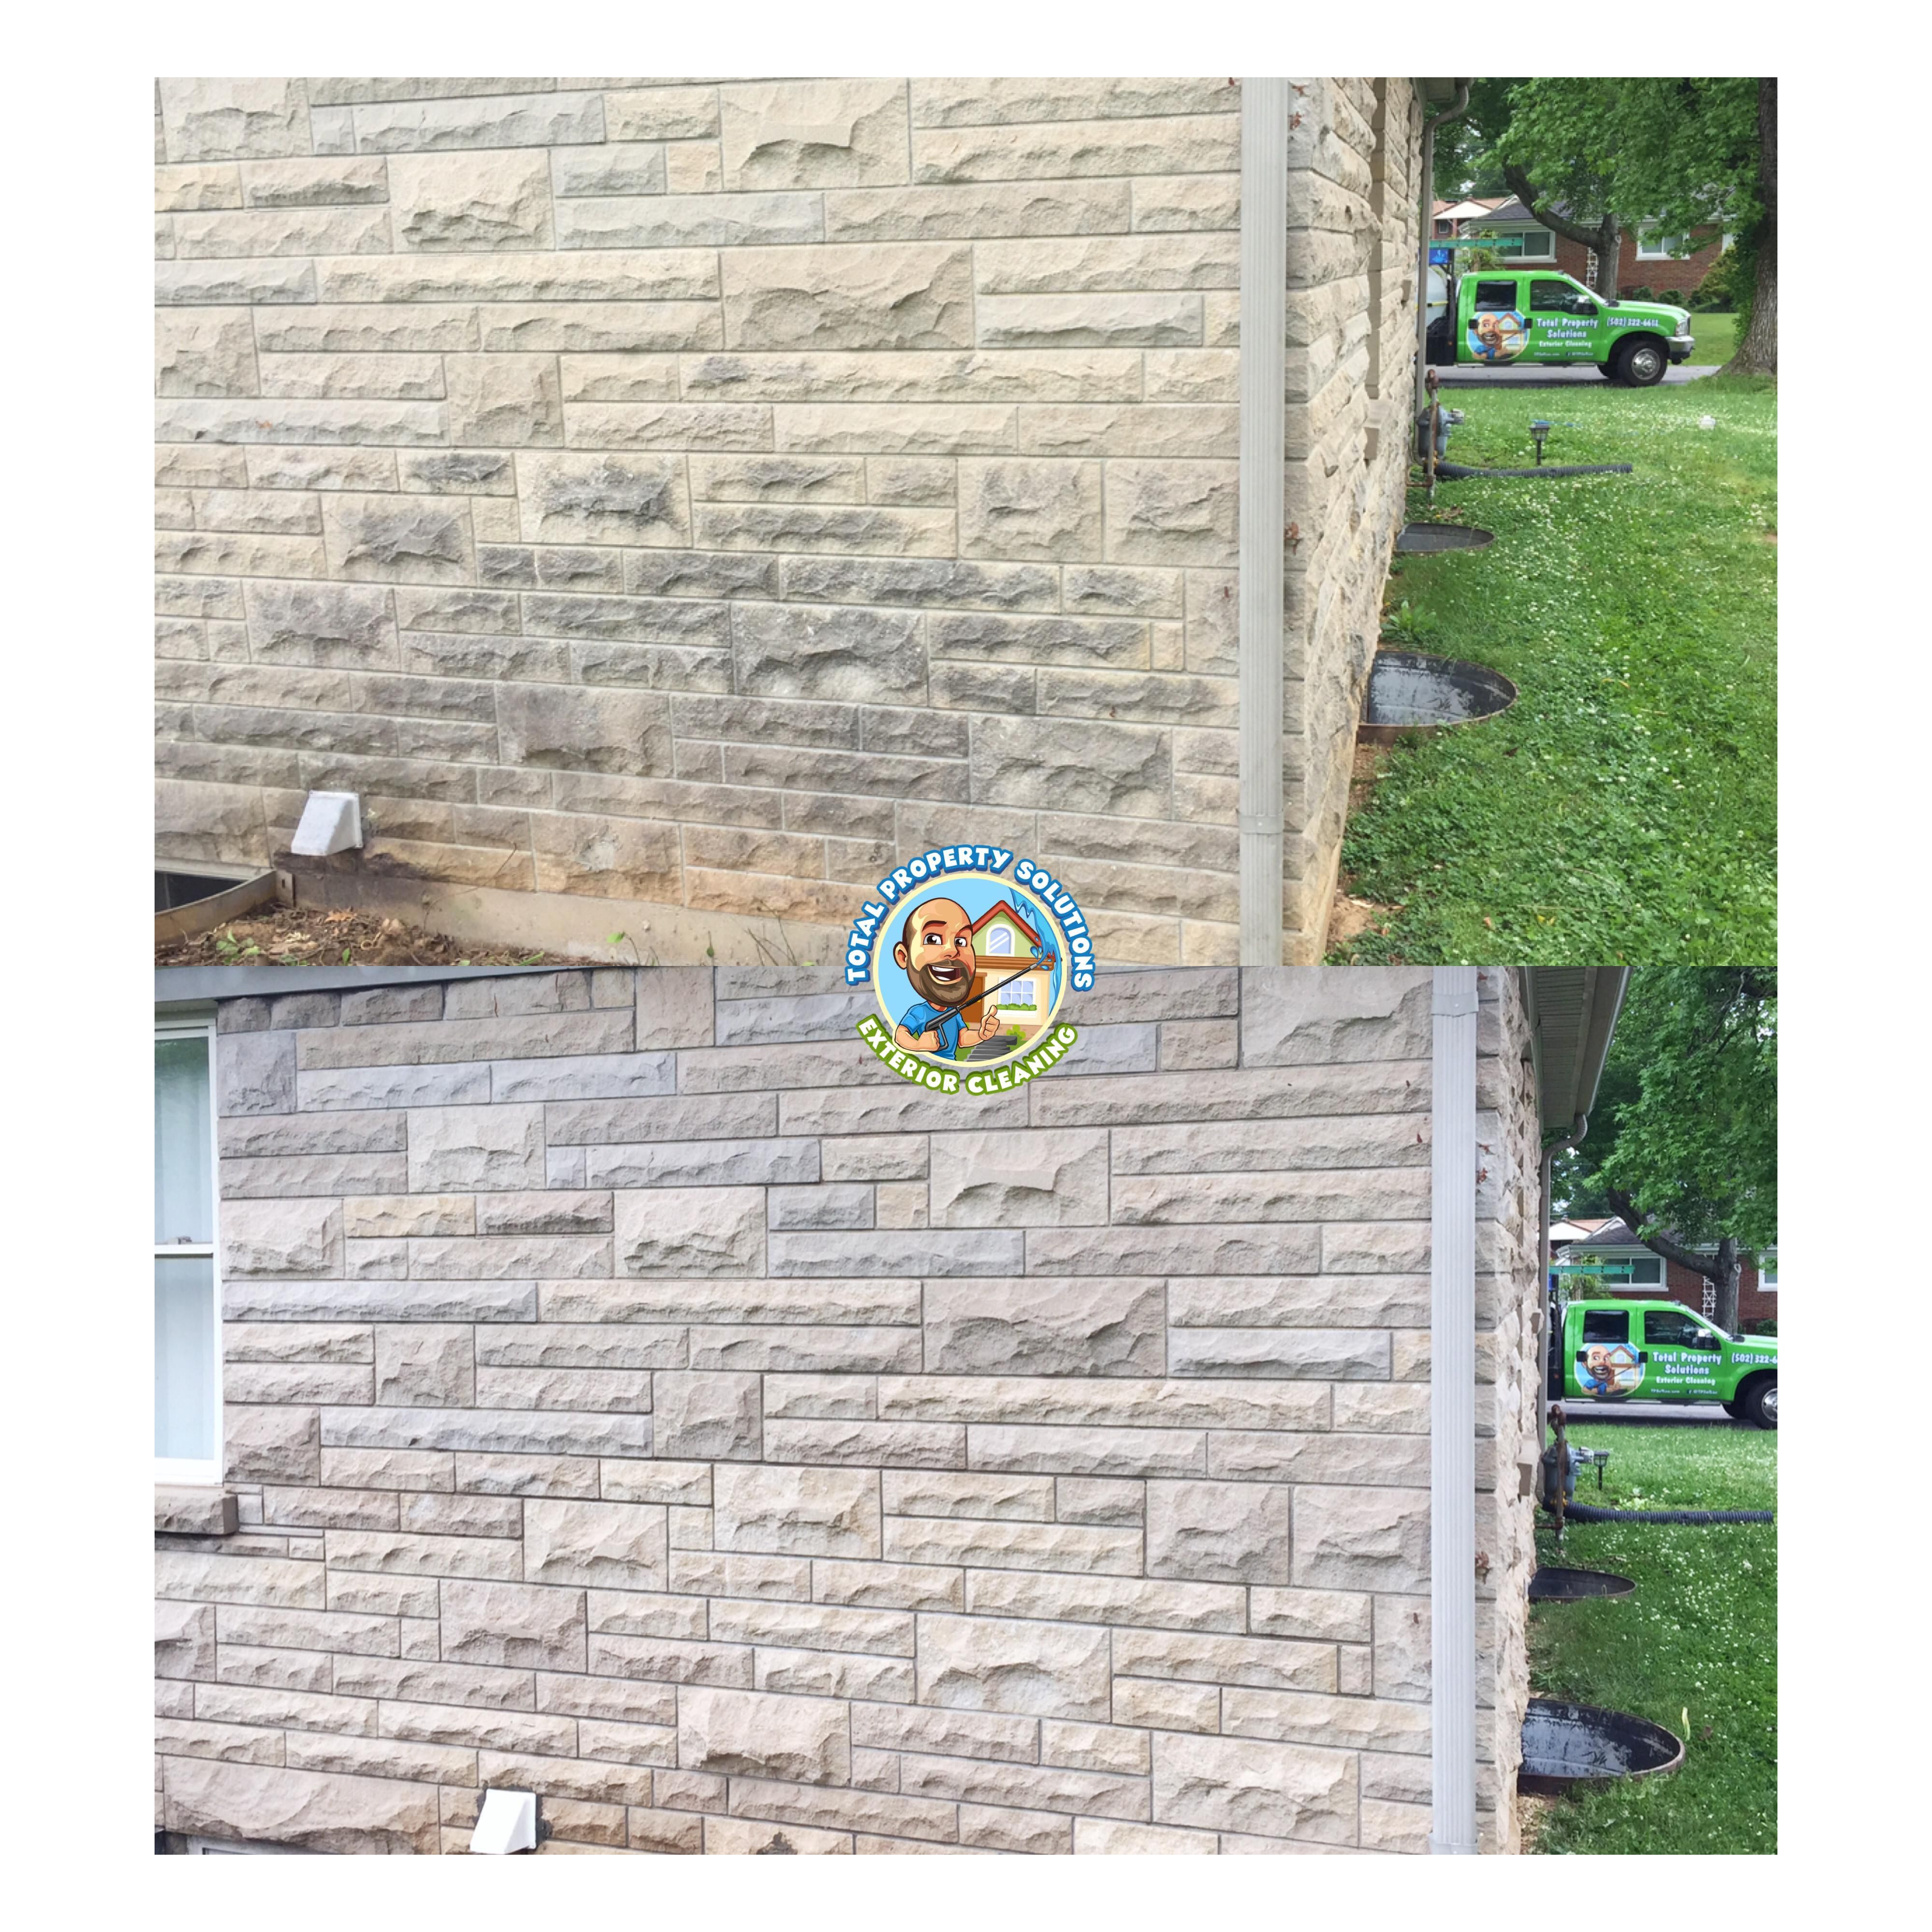 Commercial Pressure Washing for Total Property Solutions in Saint Matthews, KY